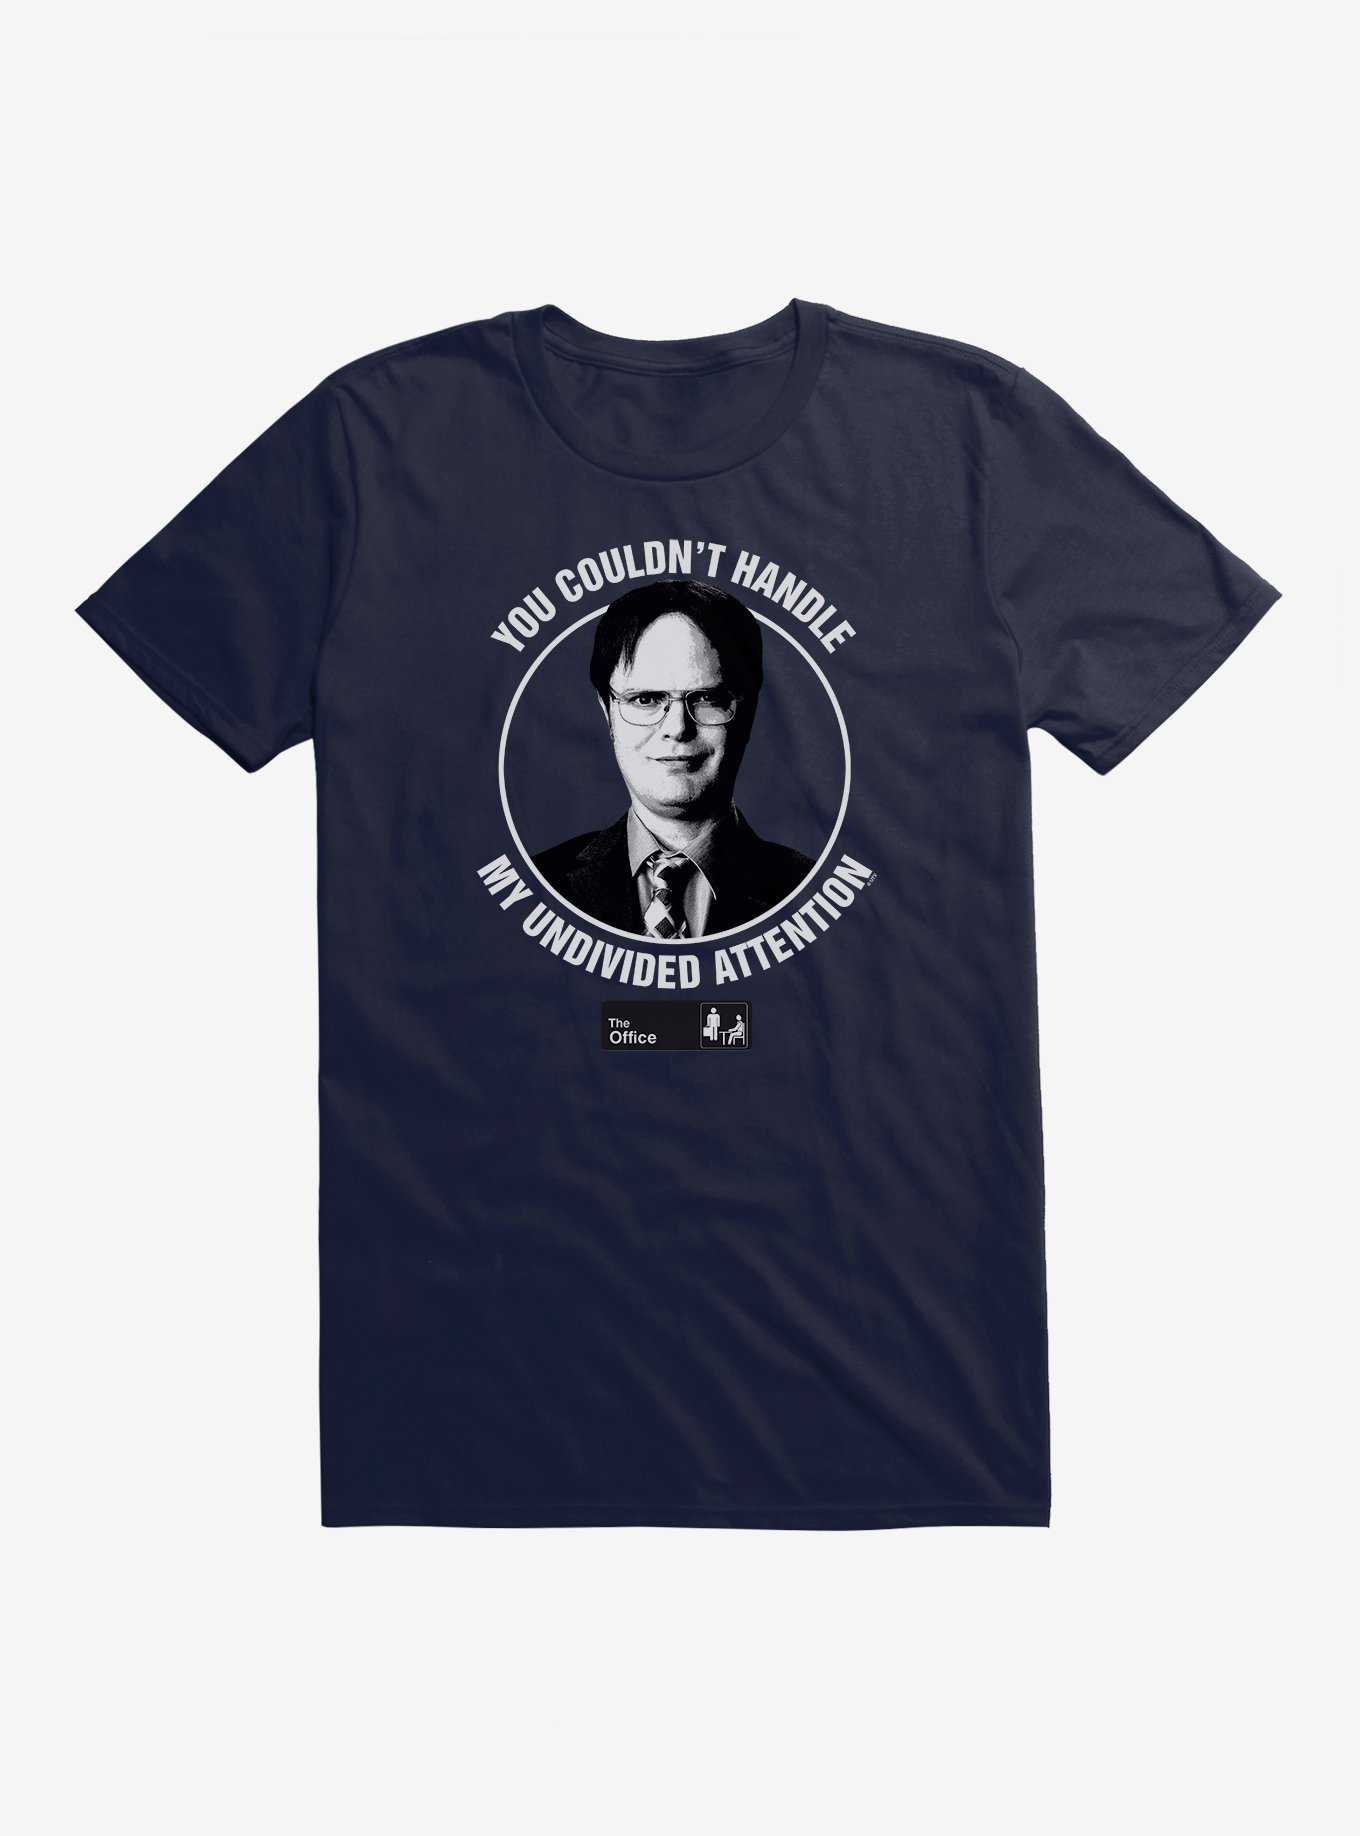 The Office Merch Shop - Official The Office Merchandise Store